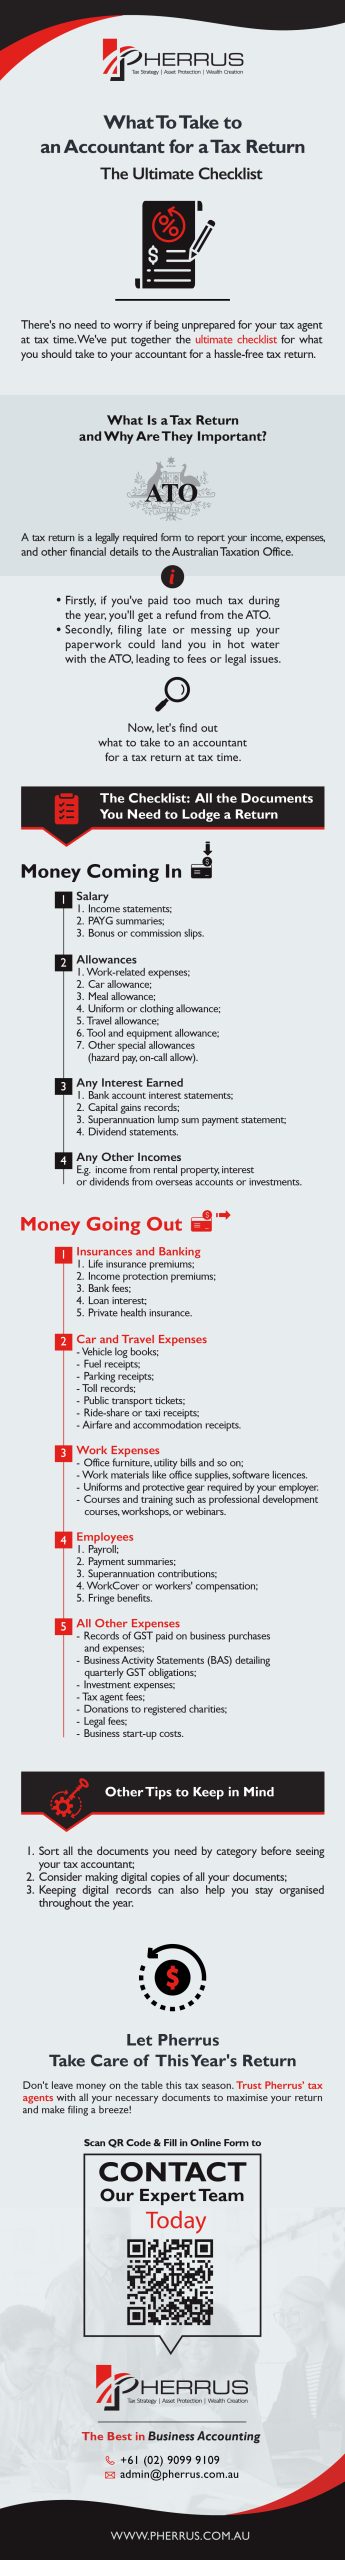 What to Take to an Accountant for a Tax Return - The Ultimate Checklist - Infographic